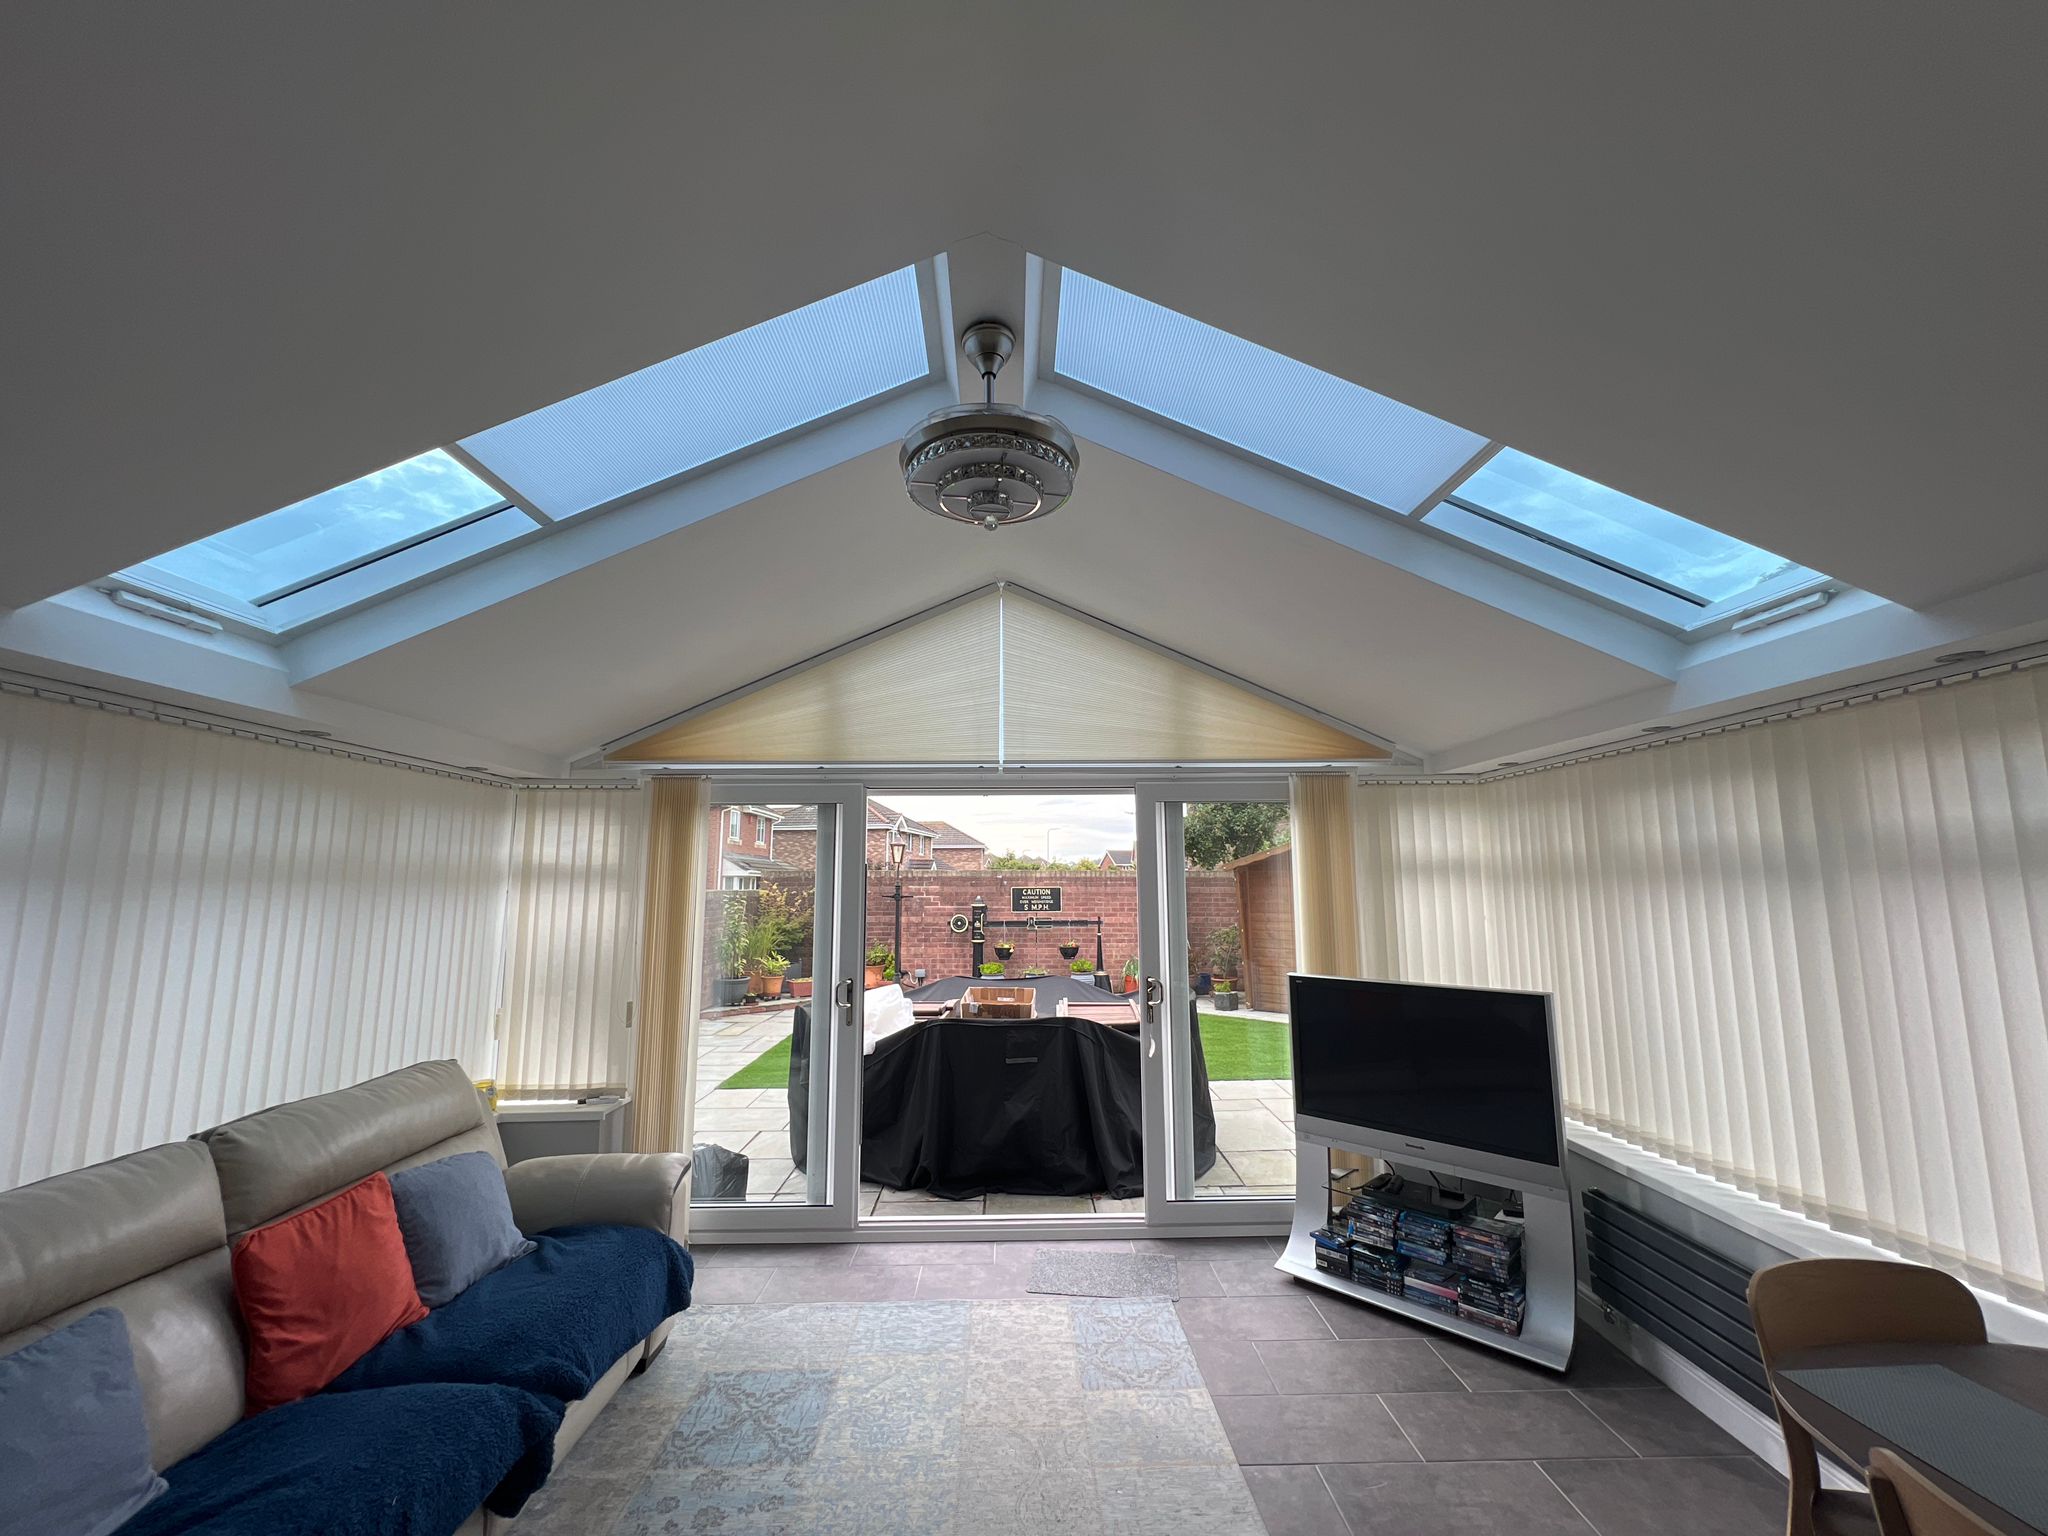 Two Slanted ClearView Lantern Roof Skylight Blinds